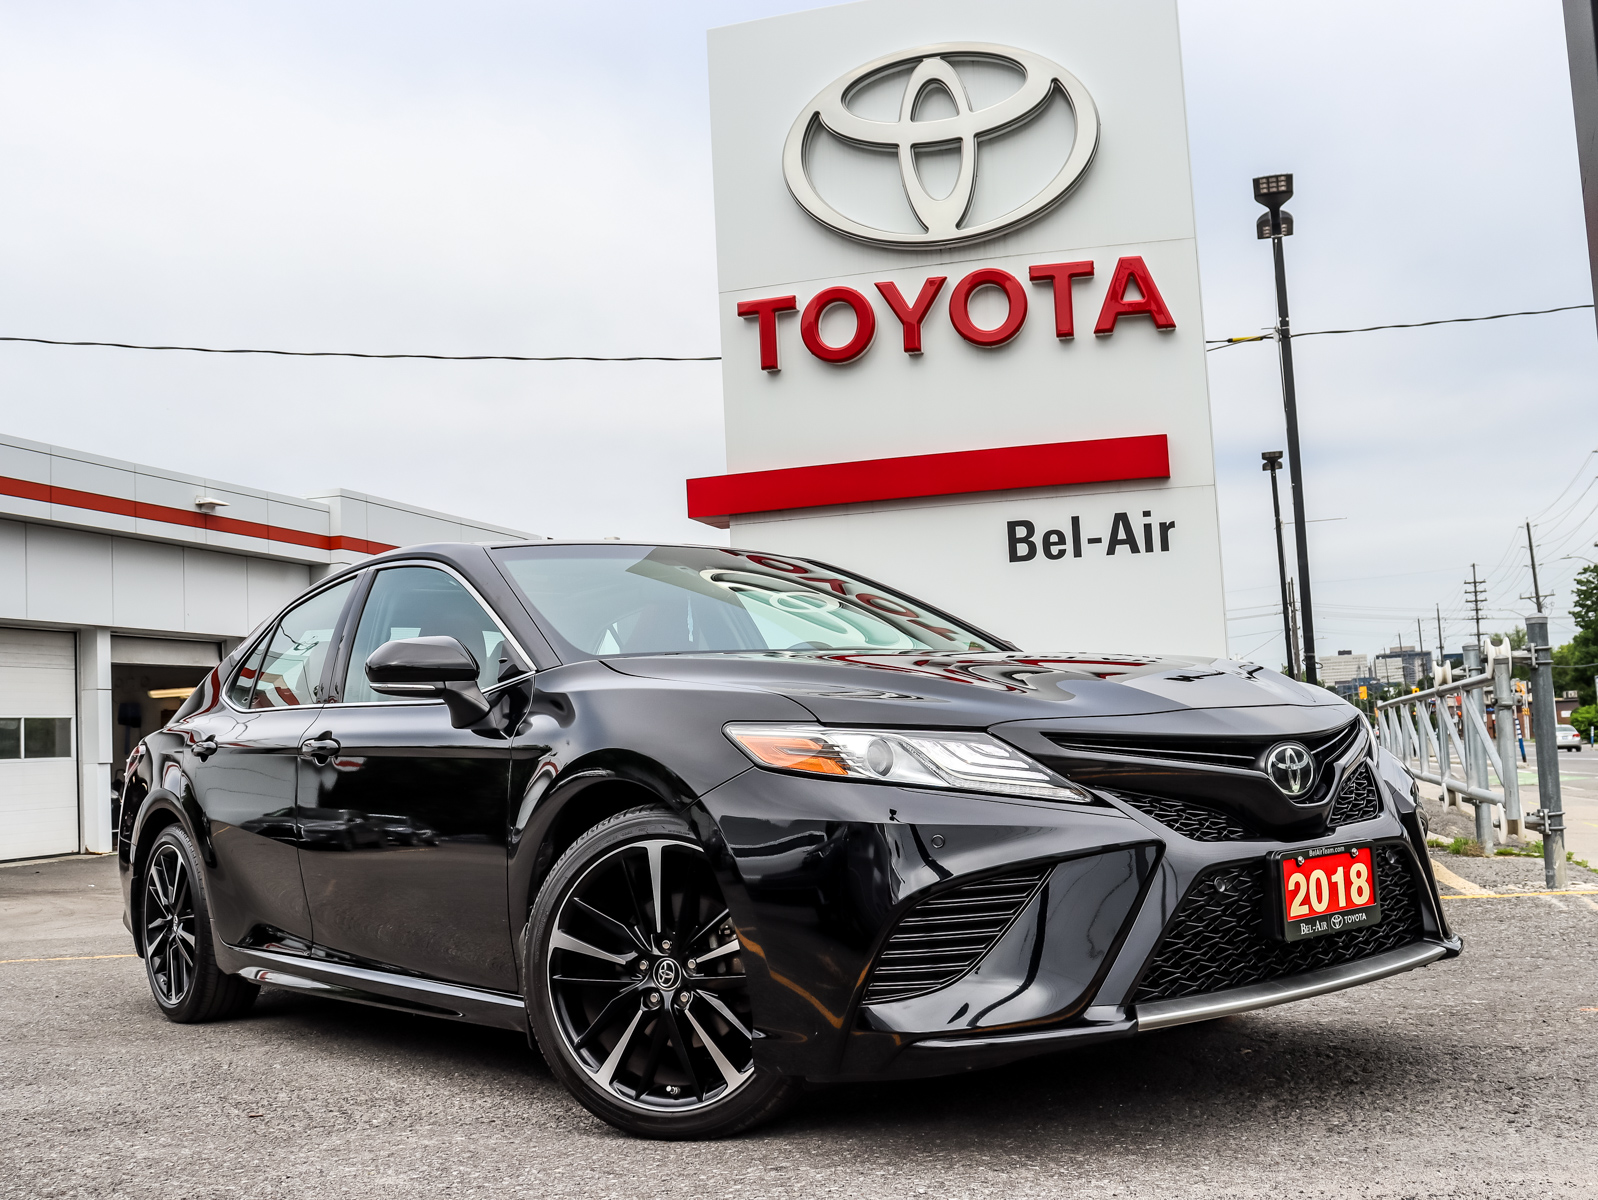 2018 Toyota Camry at Bel-Air Toyota